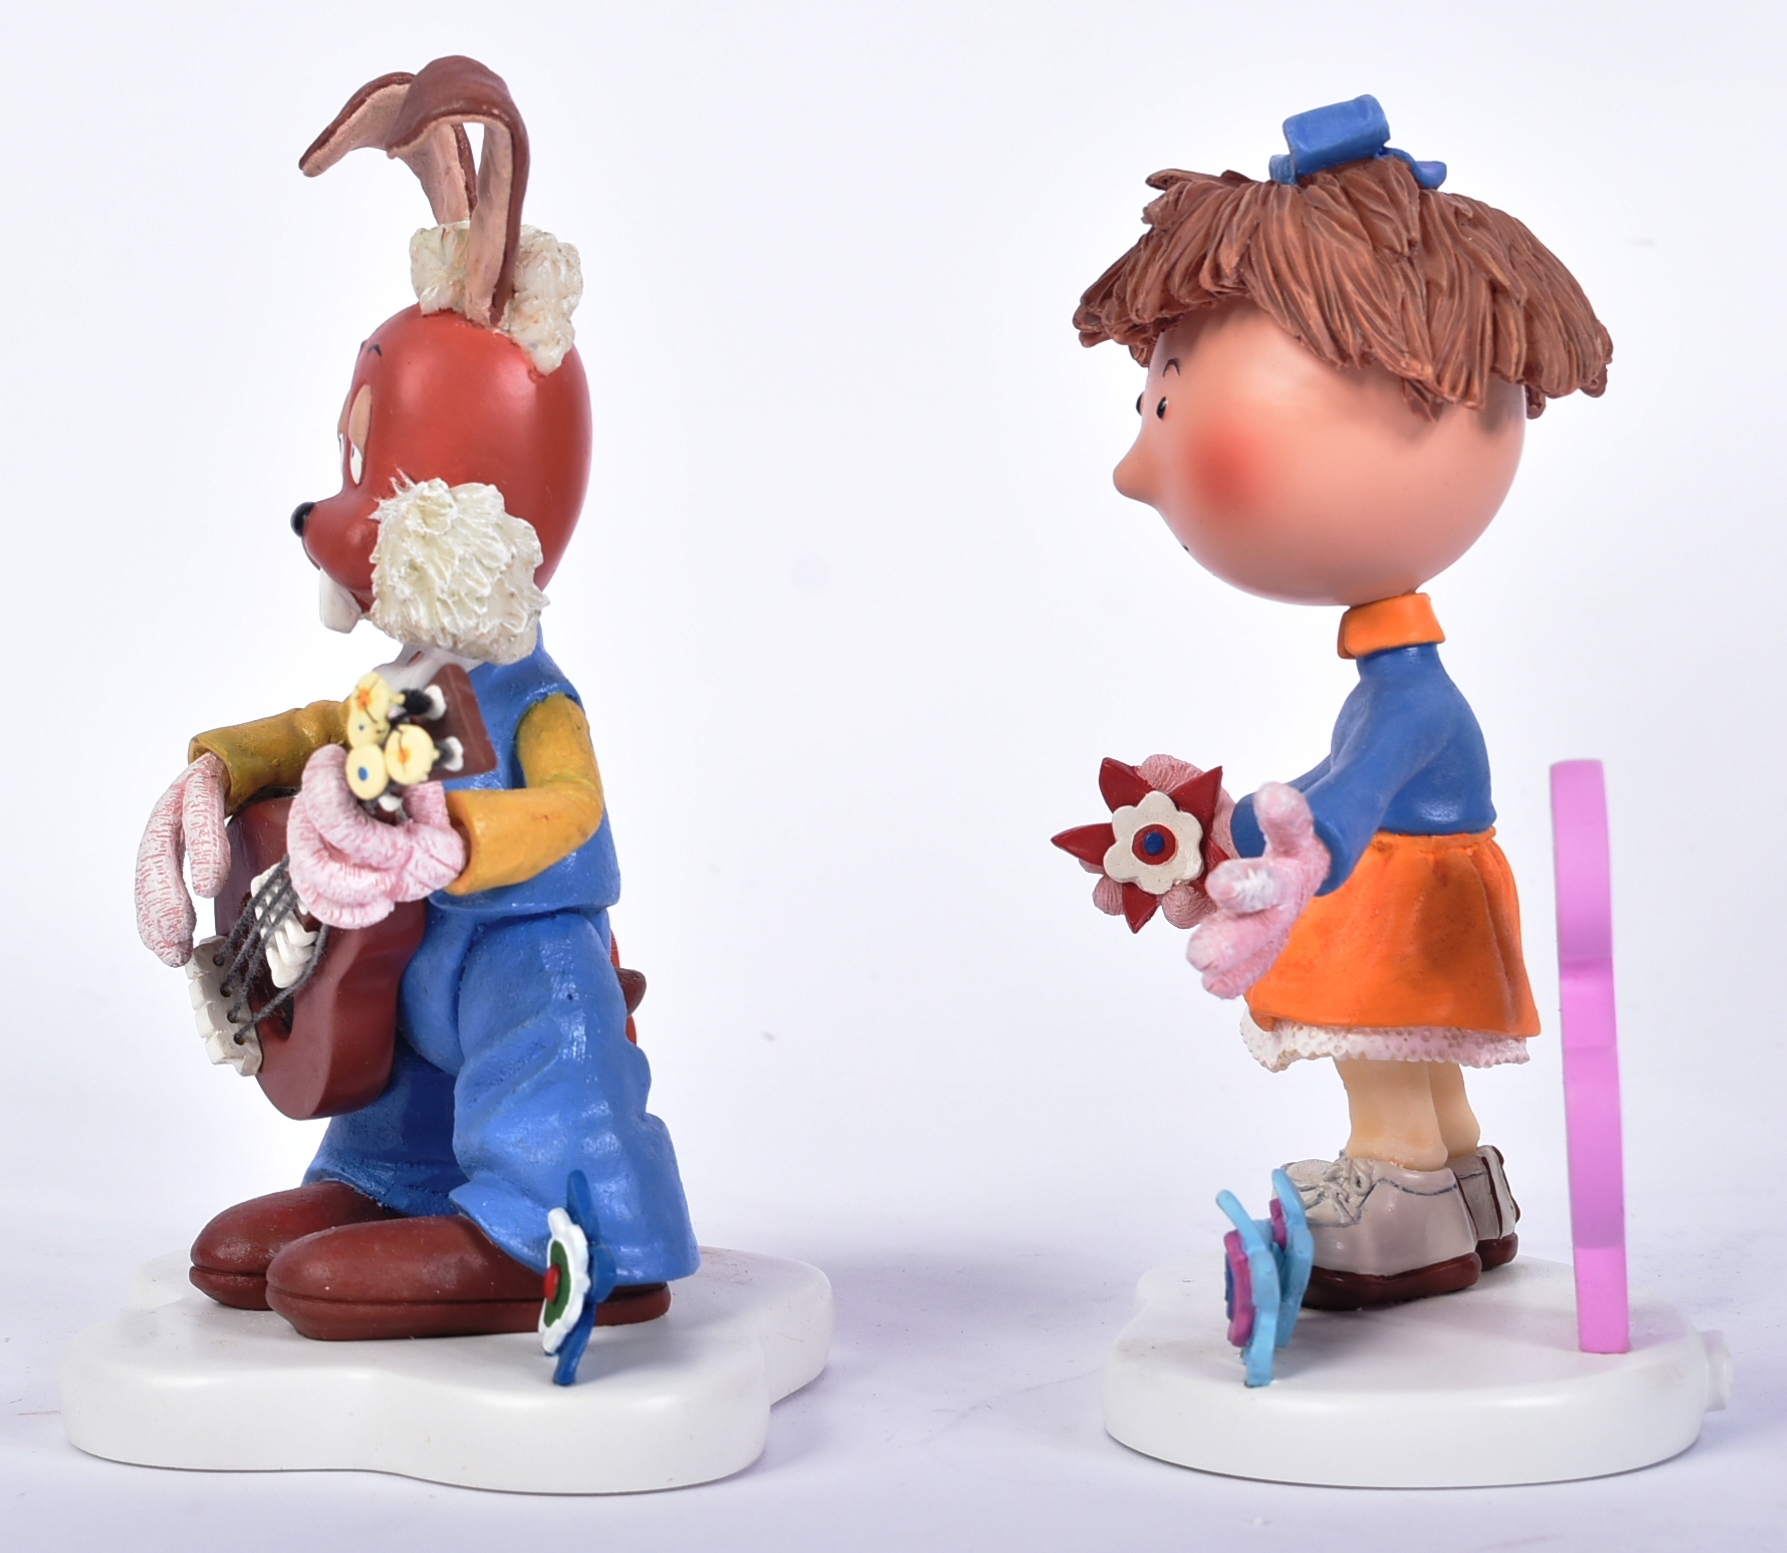 THE MAGIC ROUNDABOUT - ROBERT HARROP - FIGURINES / STATUES - Image 3 of 5